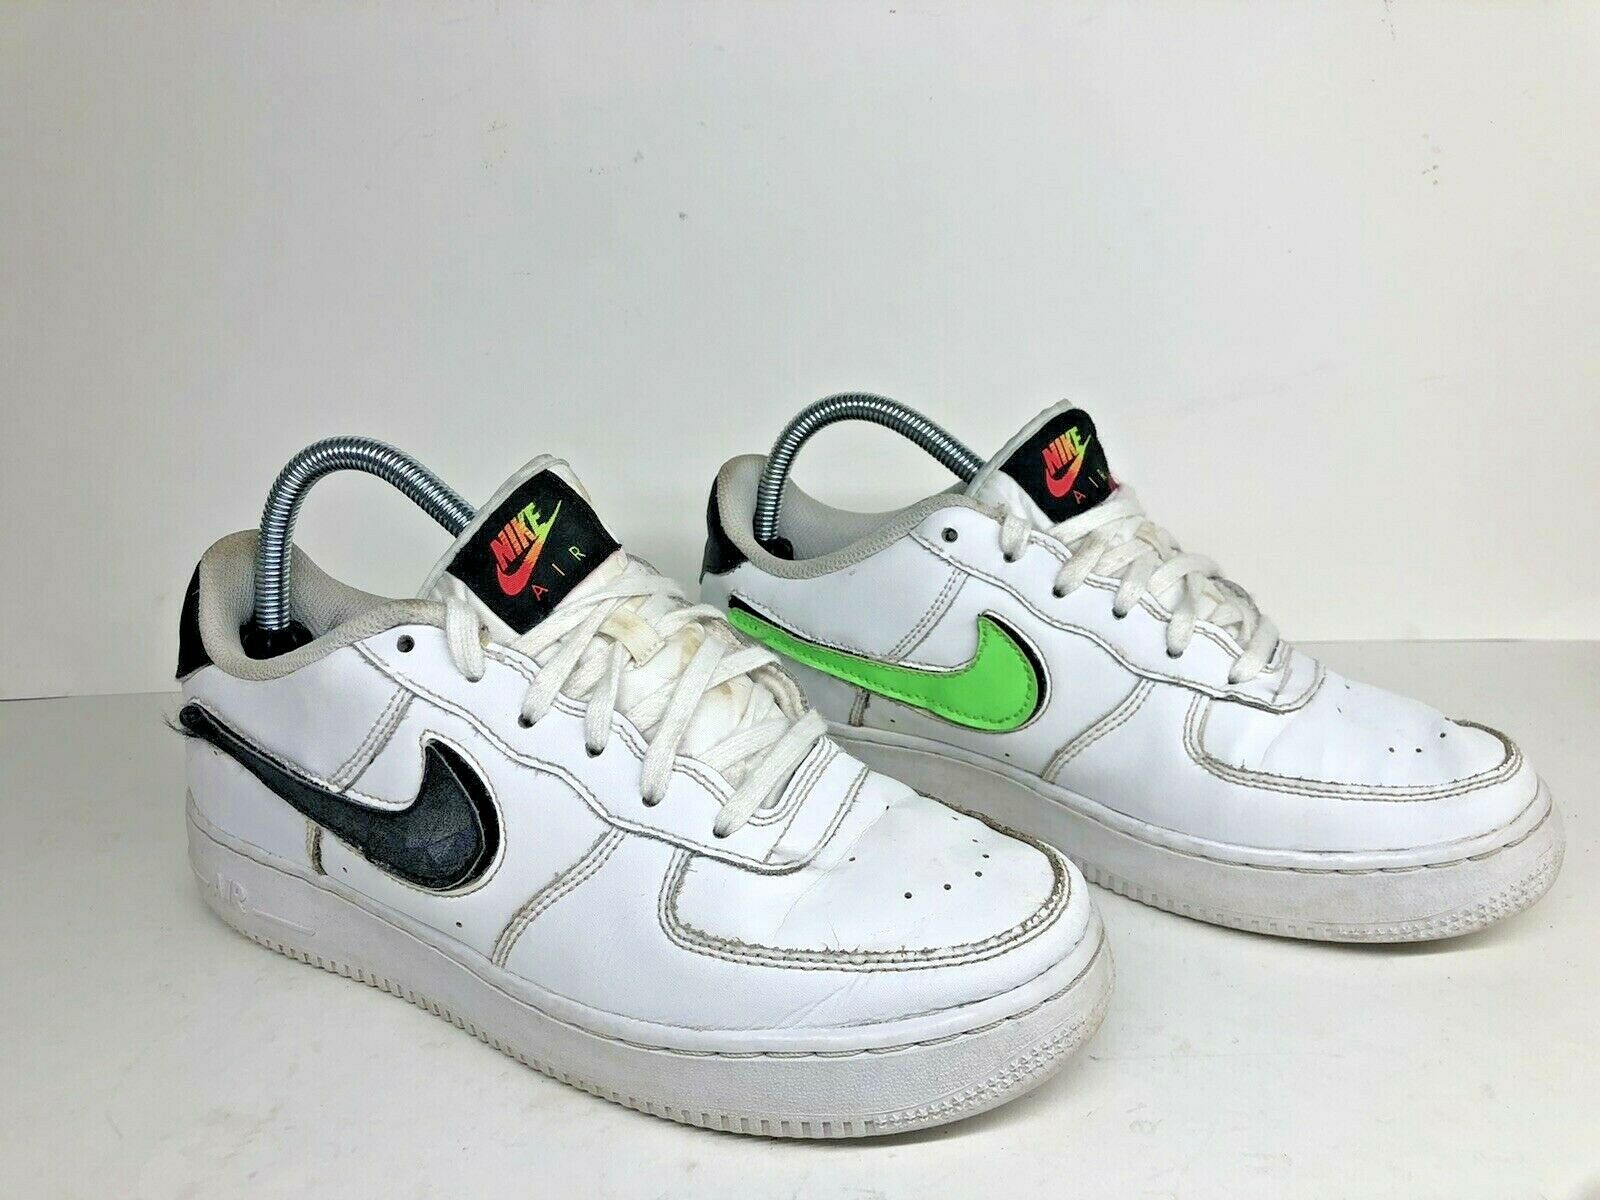 Nike Air Force 1 LV8 3 (GS) Shoes Size 7Y White/Black Strike Style AR7446 100